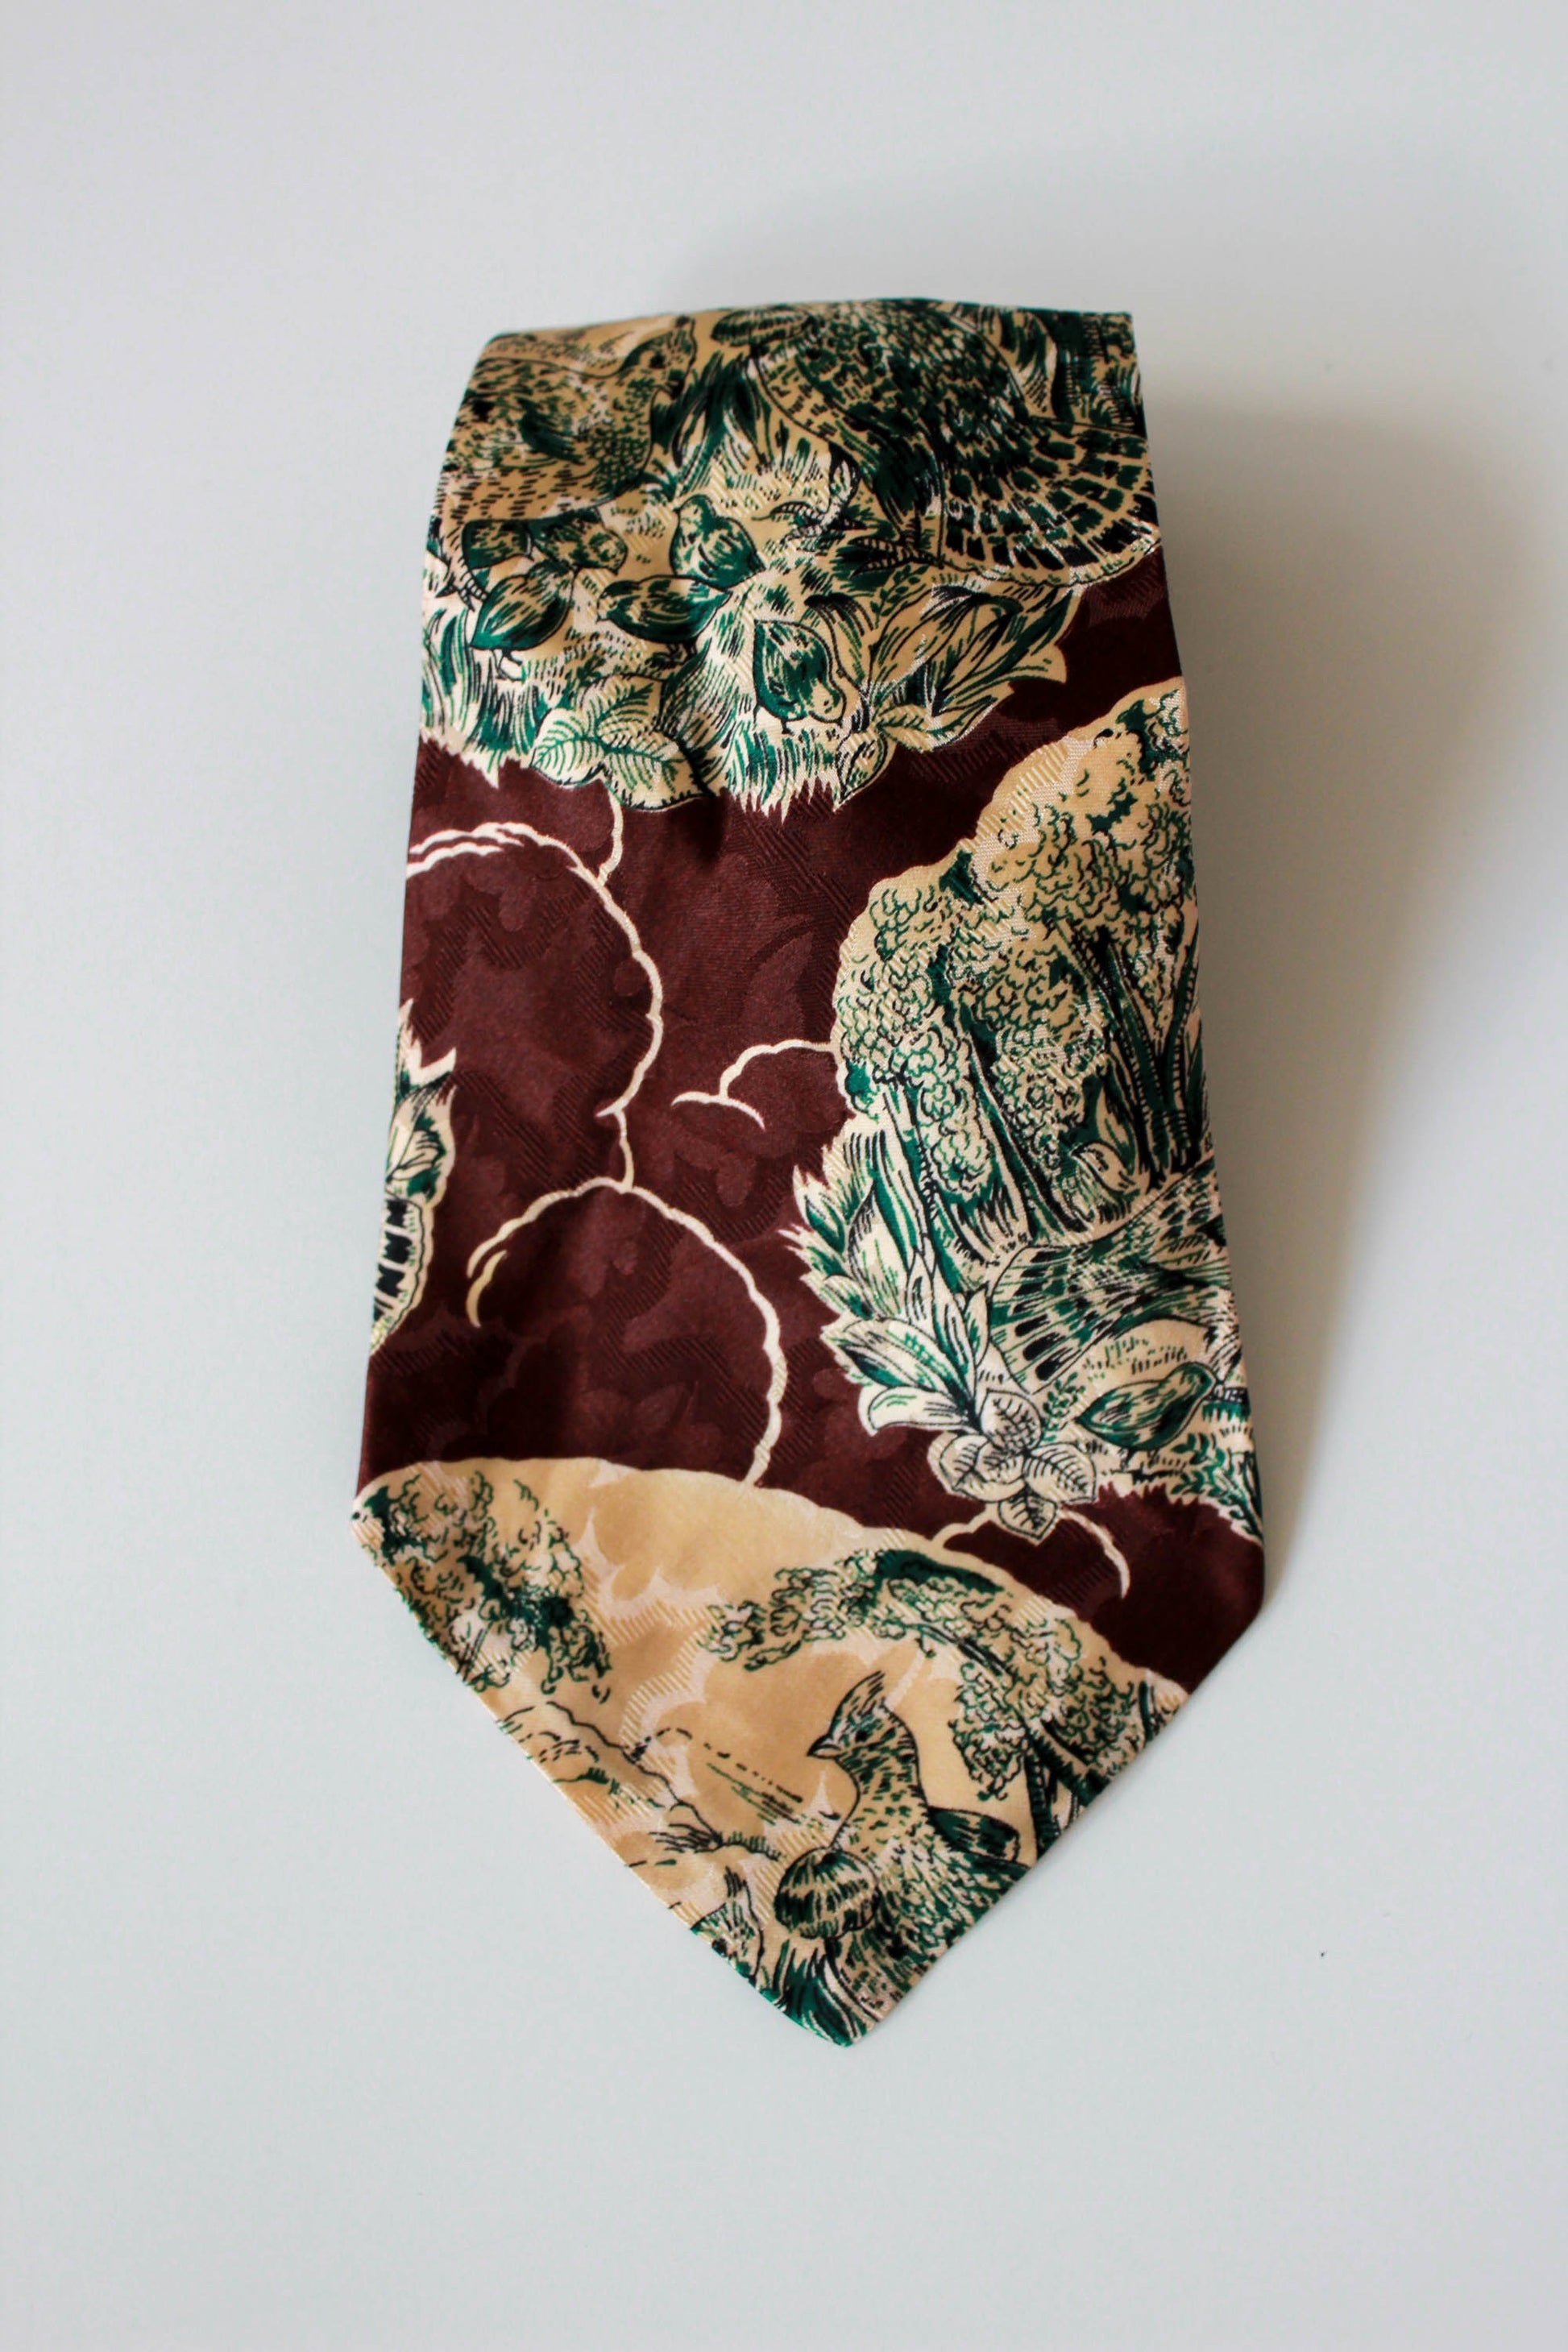 1940s superba rayon necktie, brown with green and beige bird and landscape illustration, wide tongue rayon tie